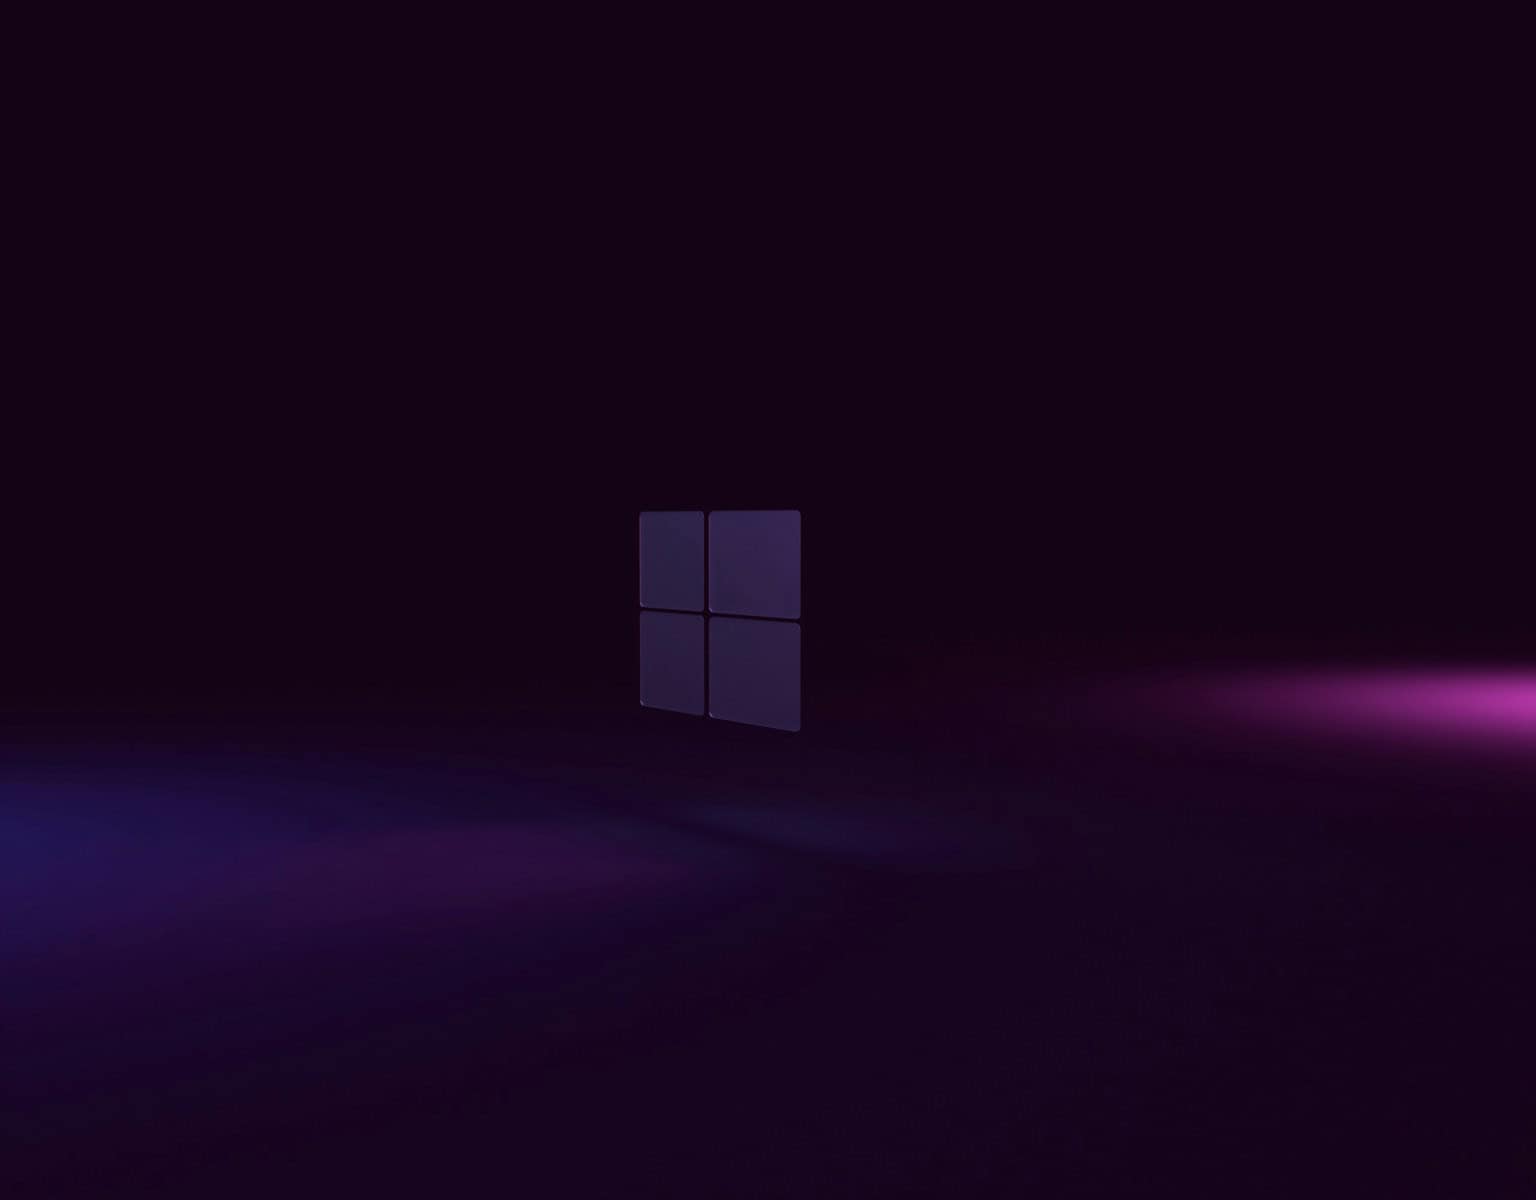 a dark room with a purple light coming out of the window